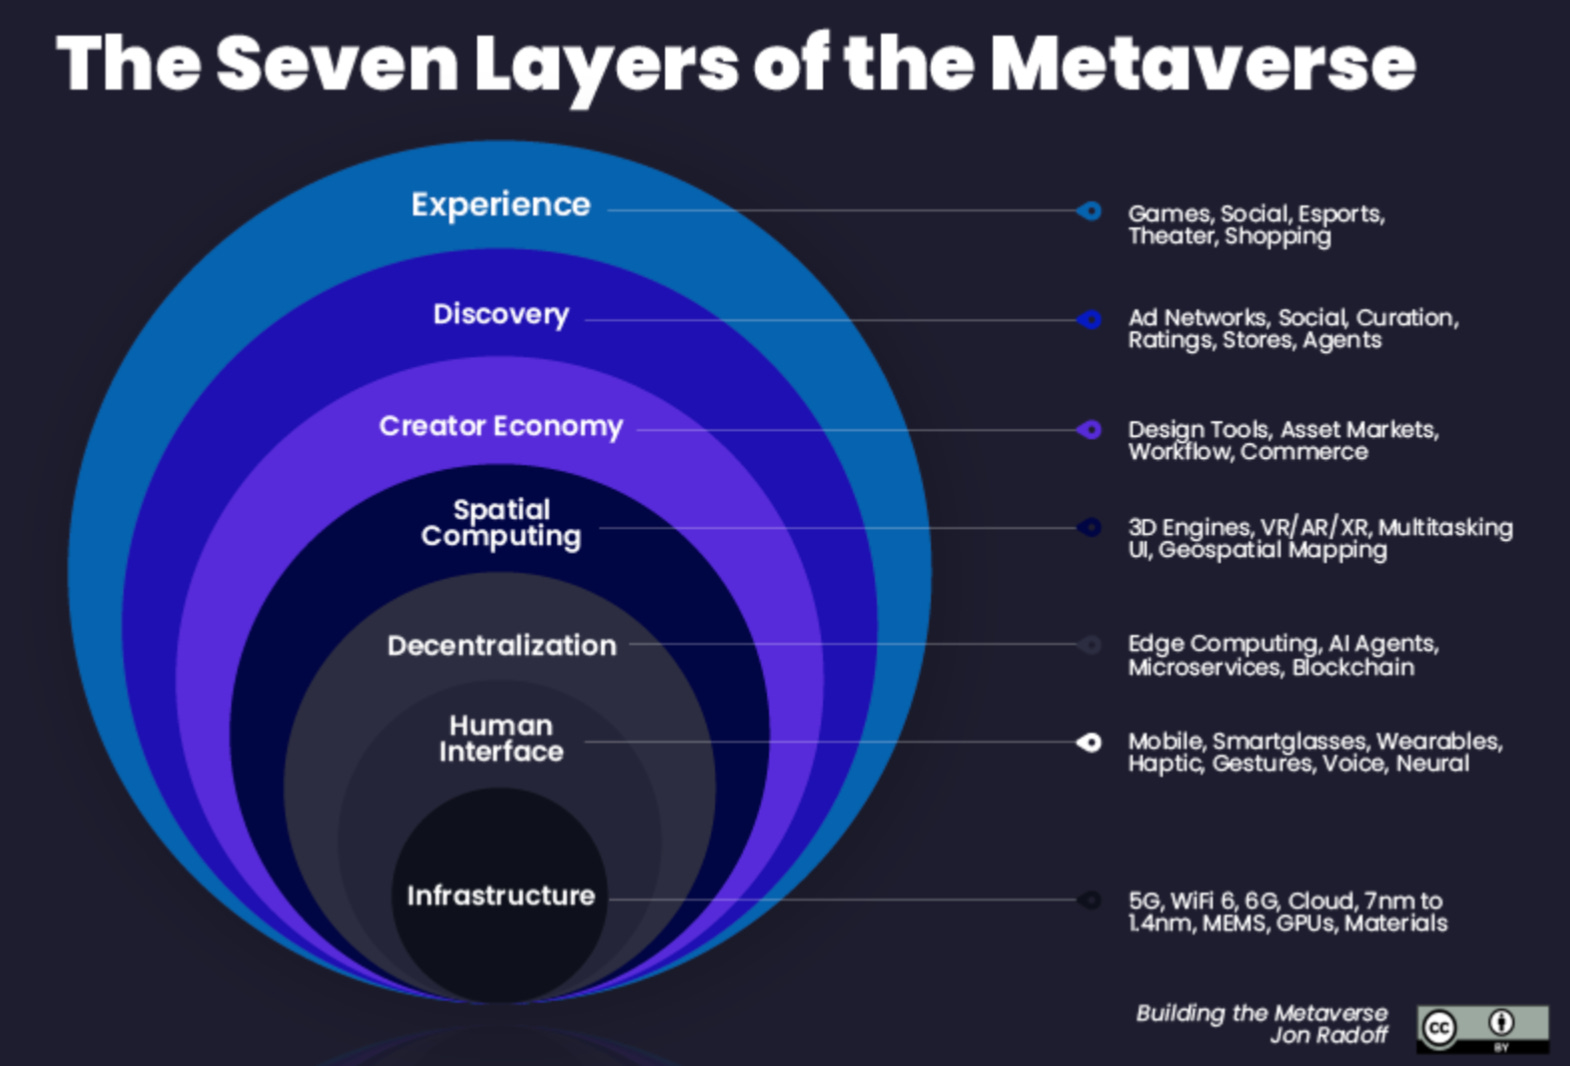 Investors Bet $1 Billion on Epic Games to Build the Metaverse « Next Reality